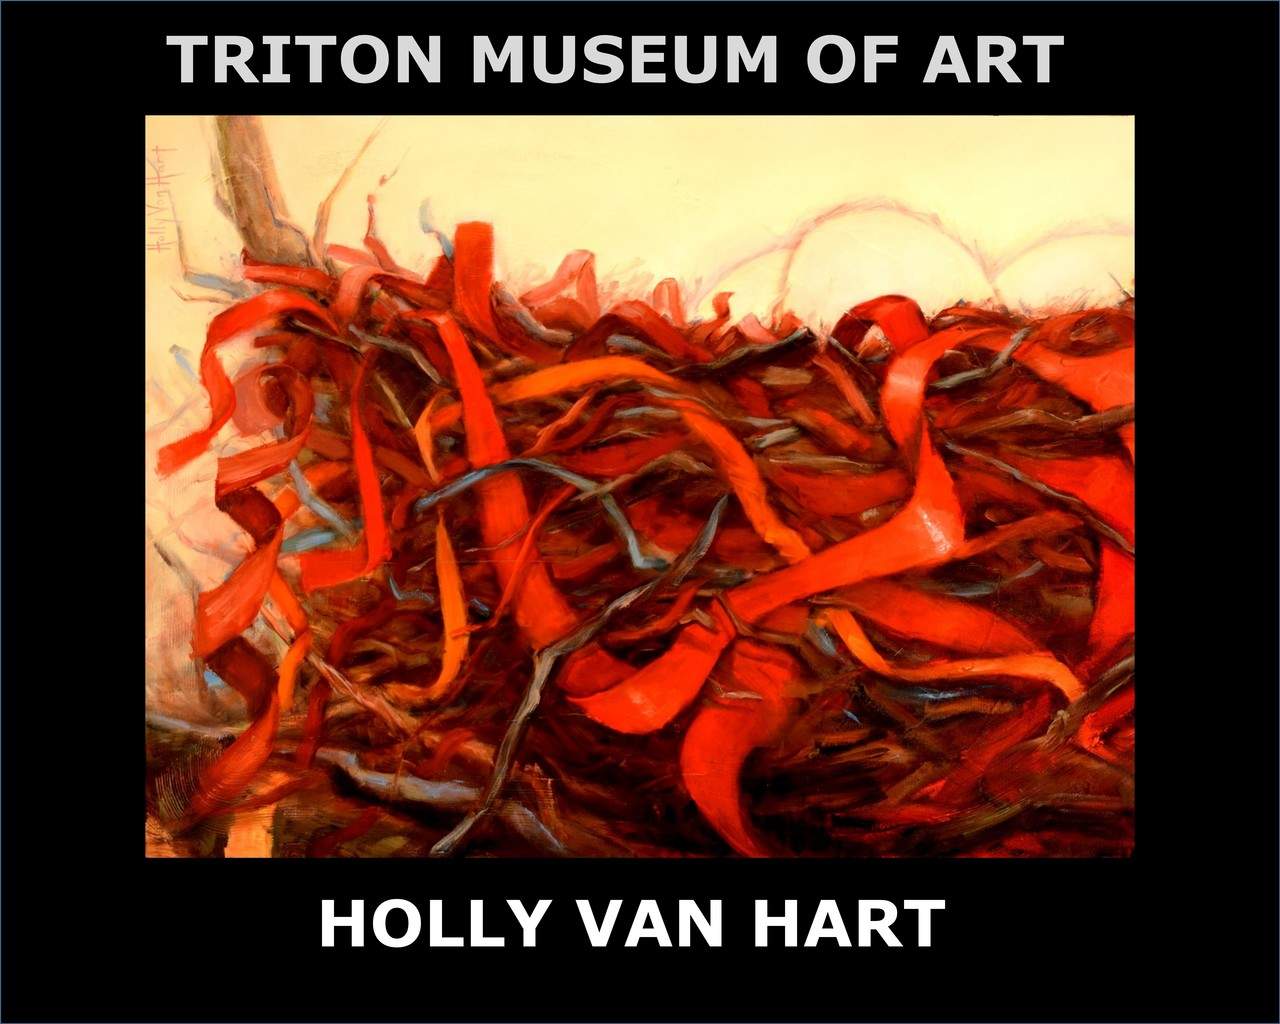 Instant Download Free Triton Museum of Art book for Holly Van Hart's solo exhibition